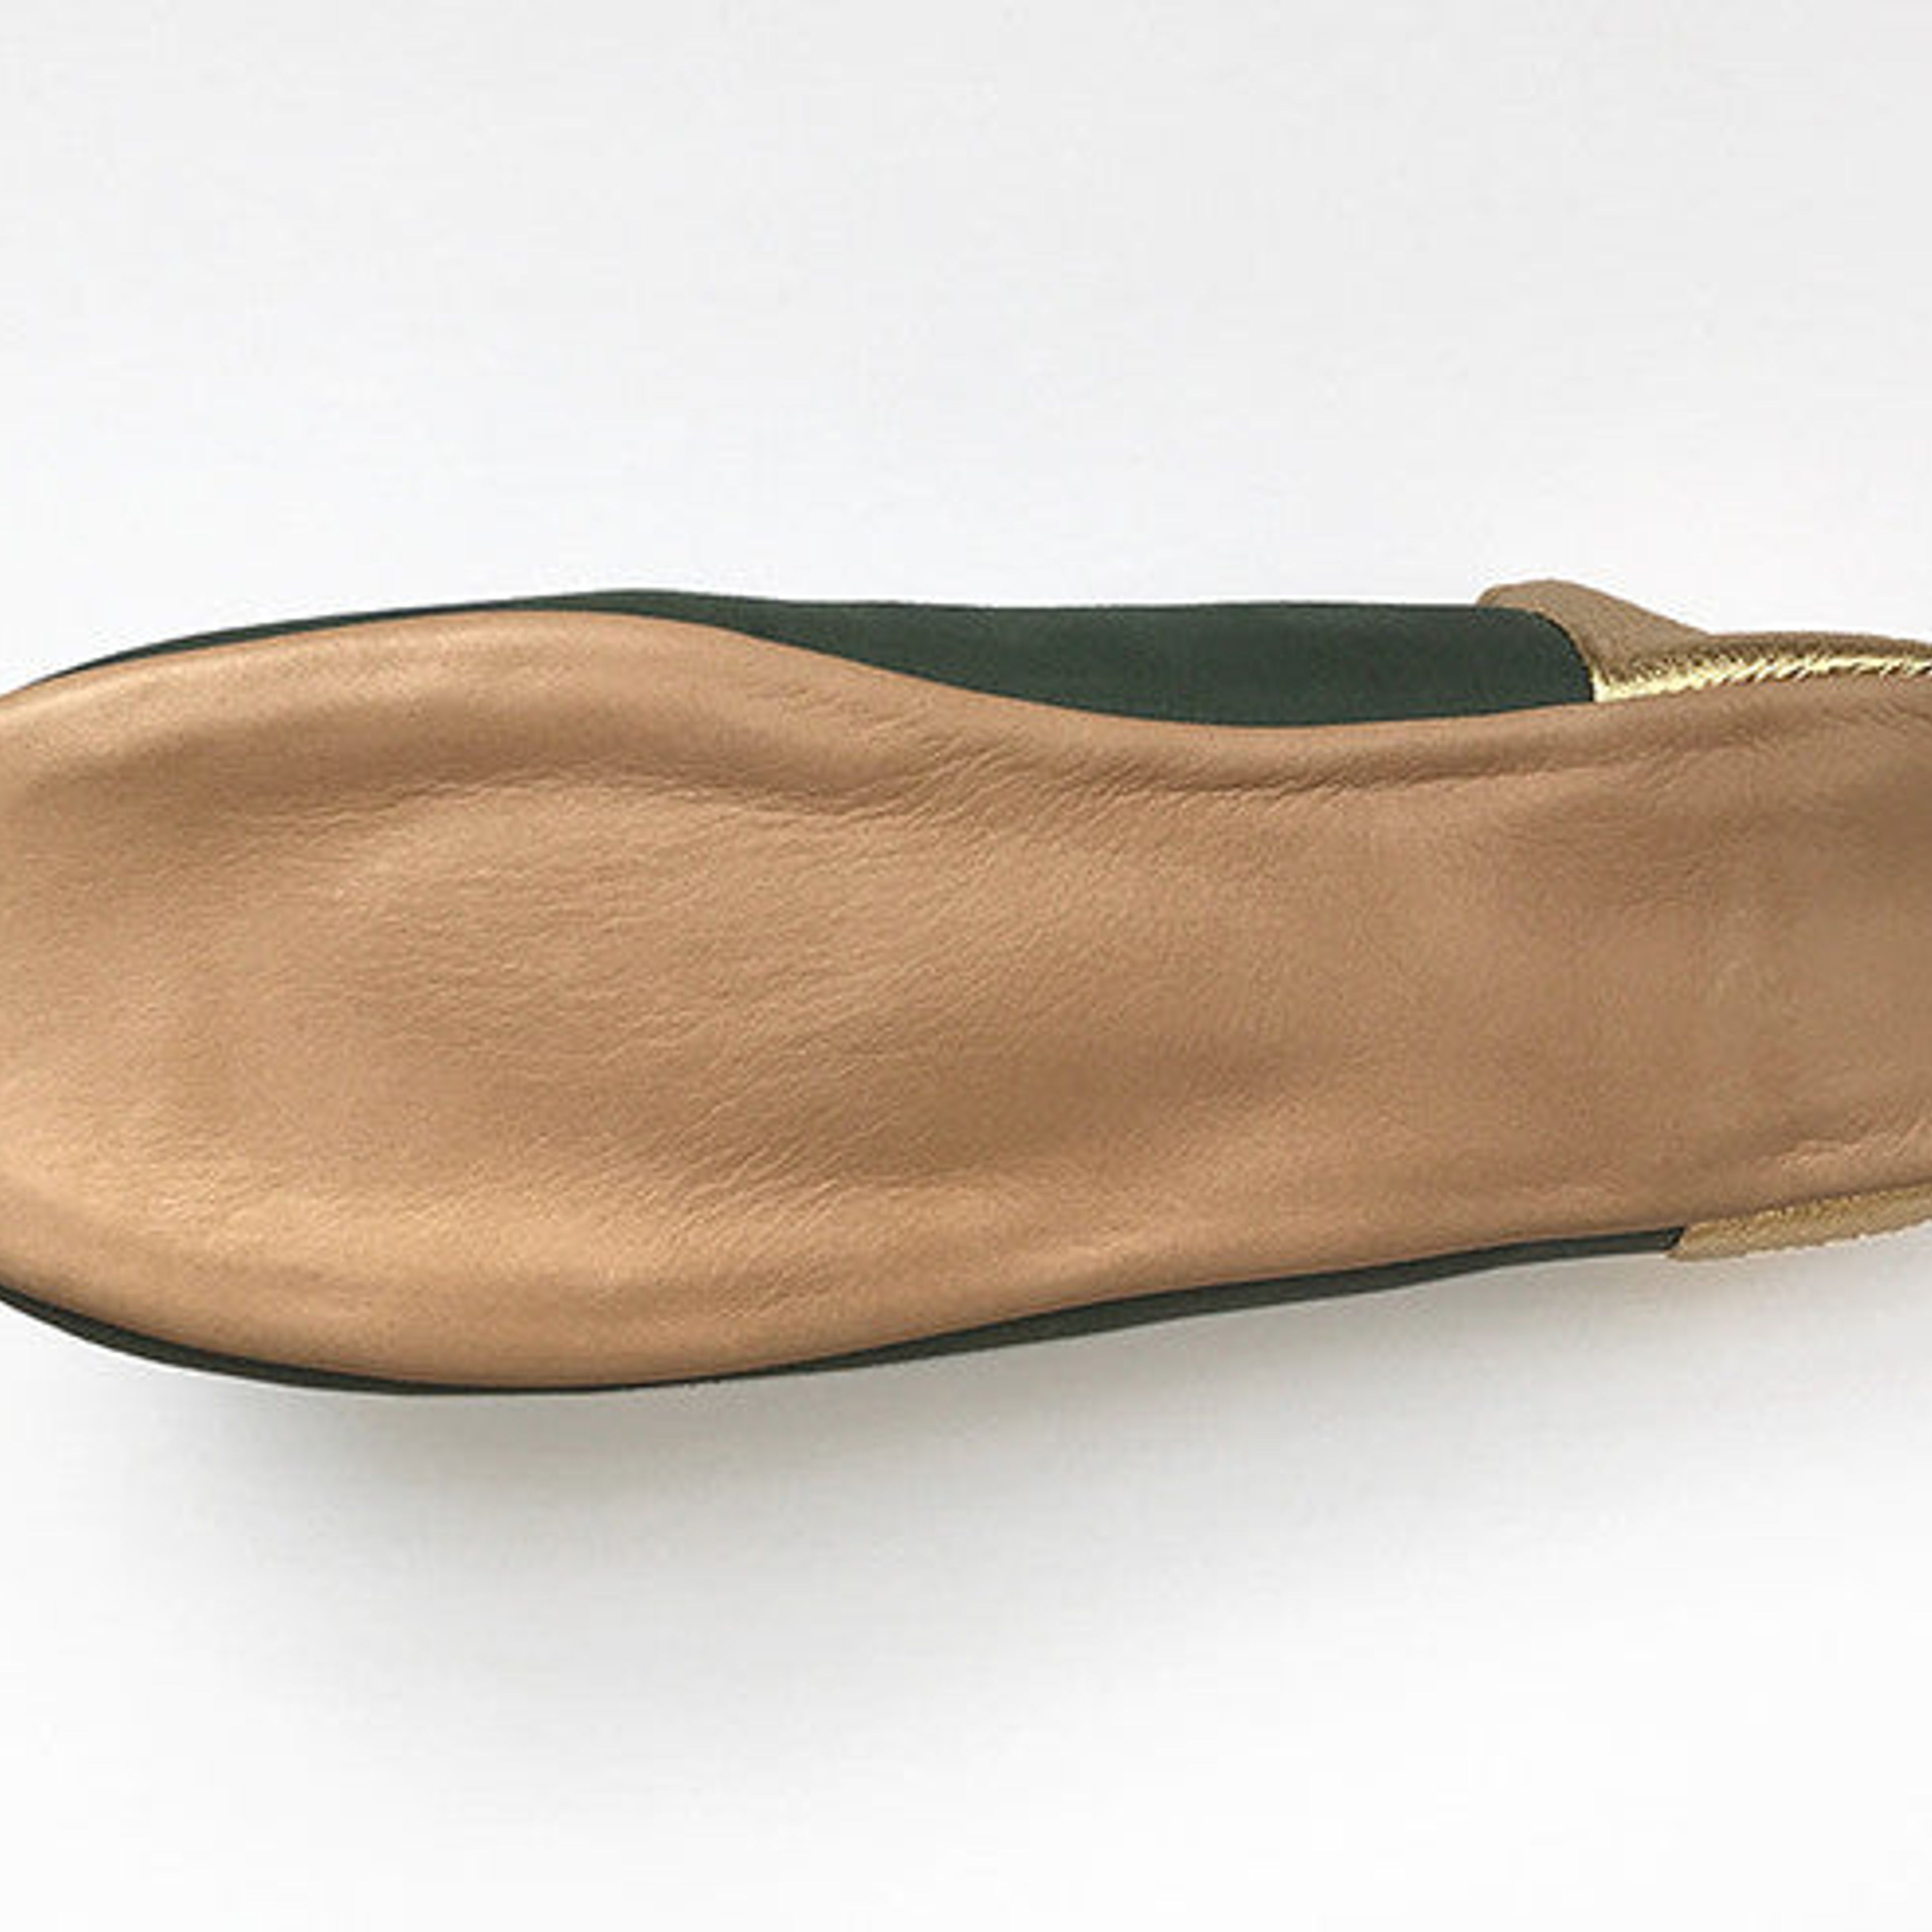 Bright White & Camel Leather House Slippers